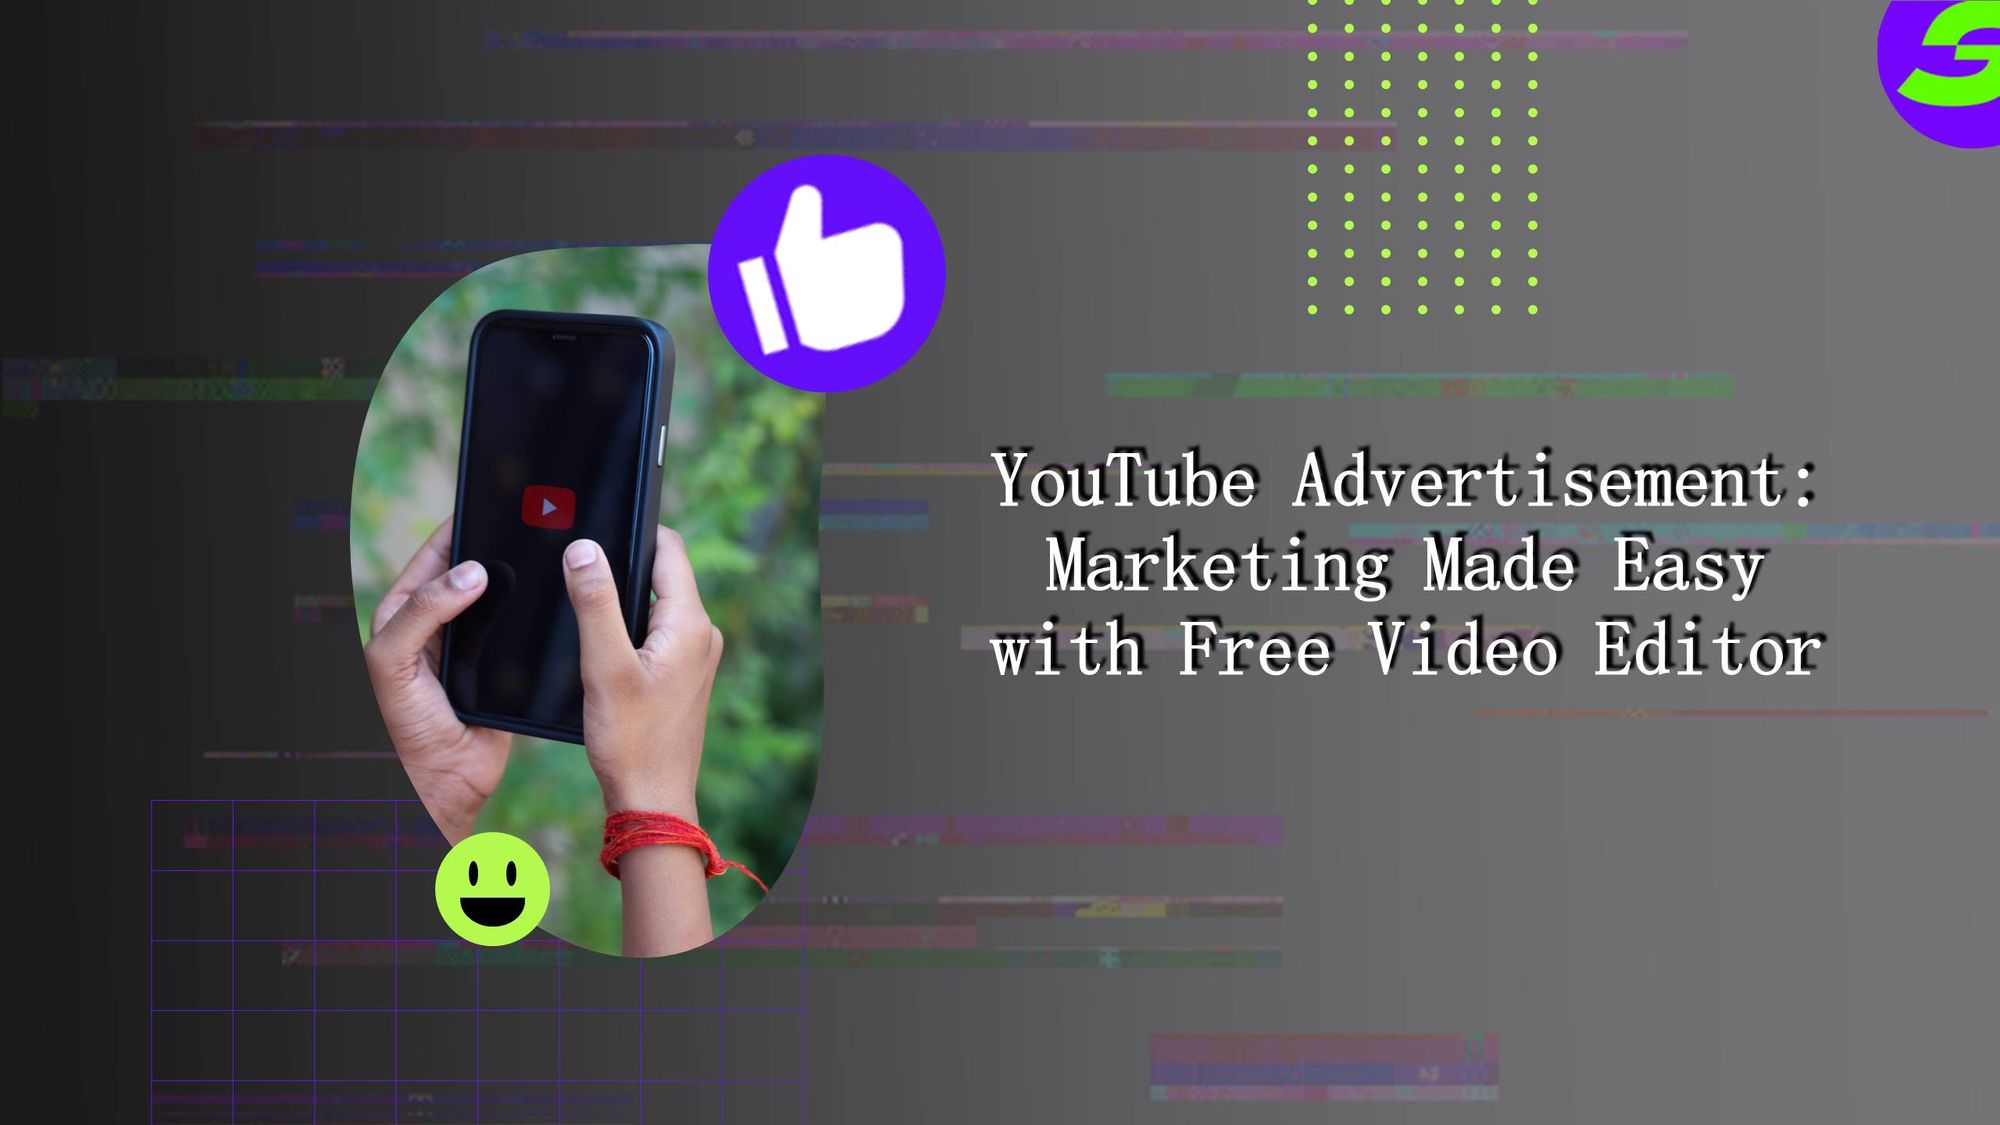 How to make YouTube Advertisement using Free Video Editor